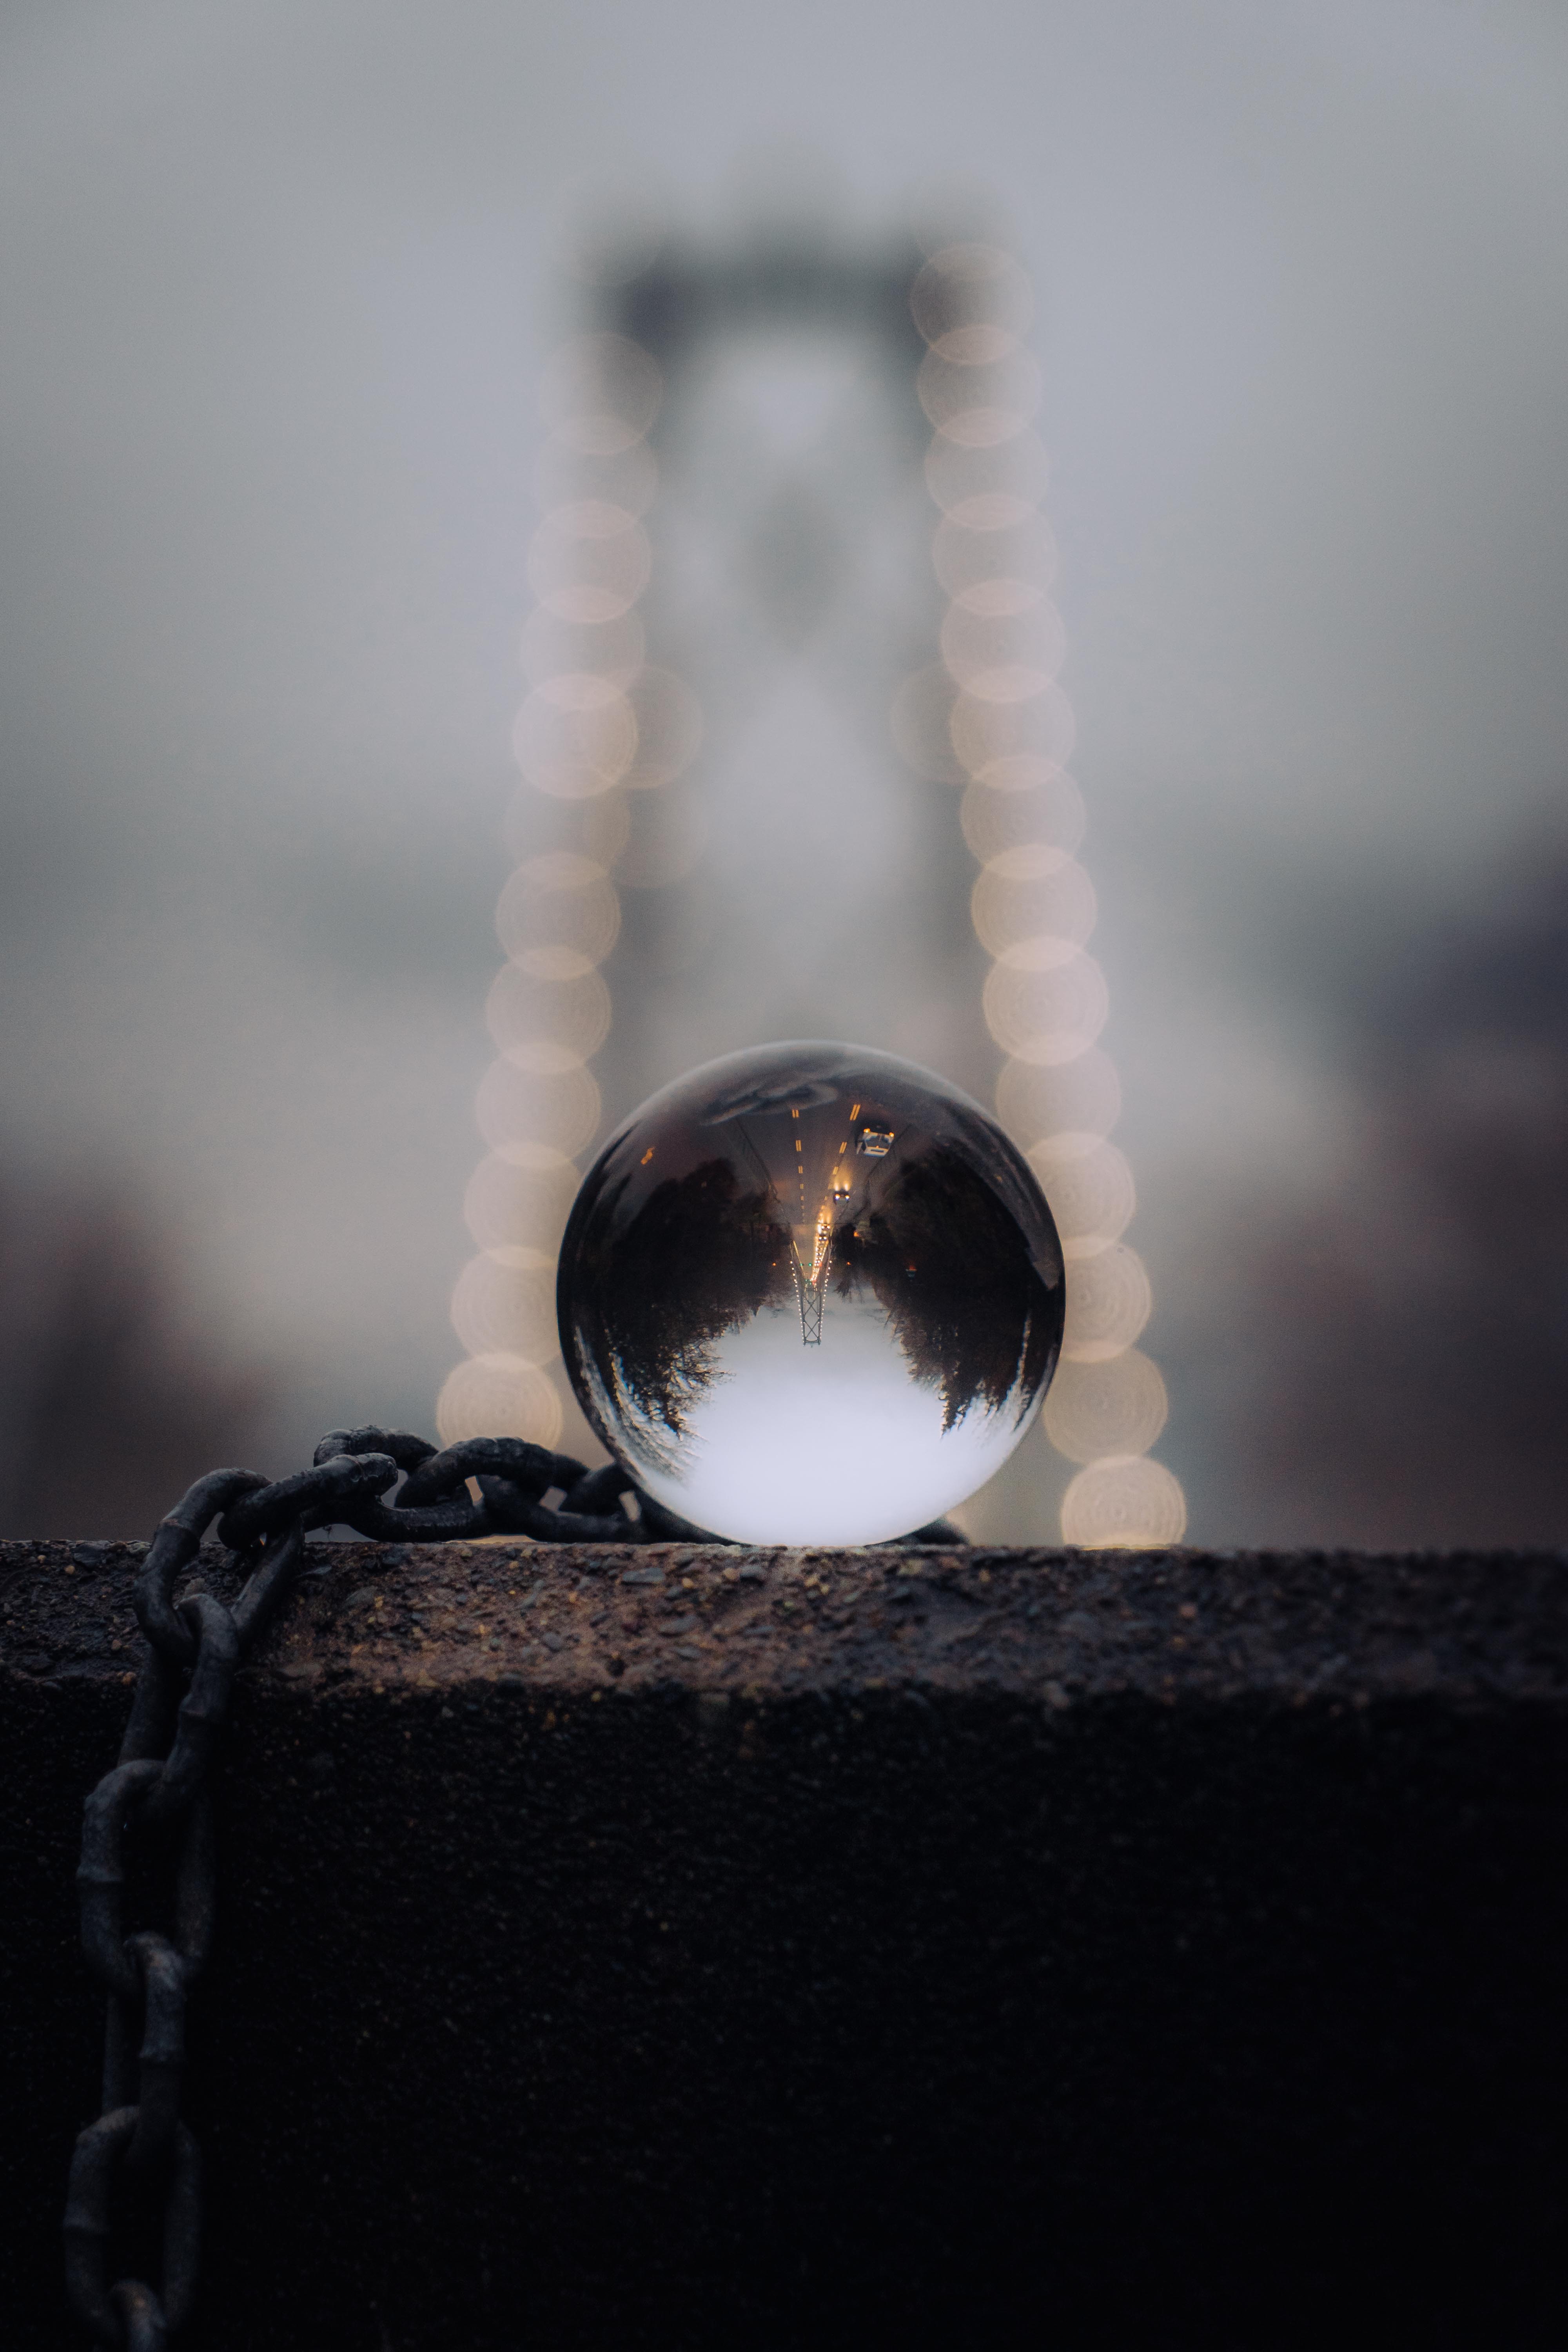 android crystal ball, ball, reflection, miscellanea, miscellaneous, chain